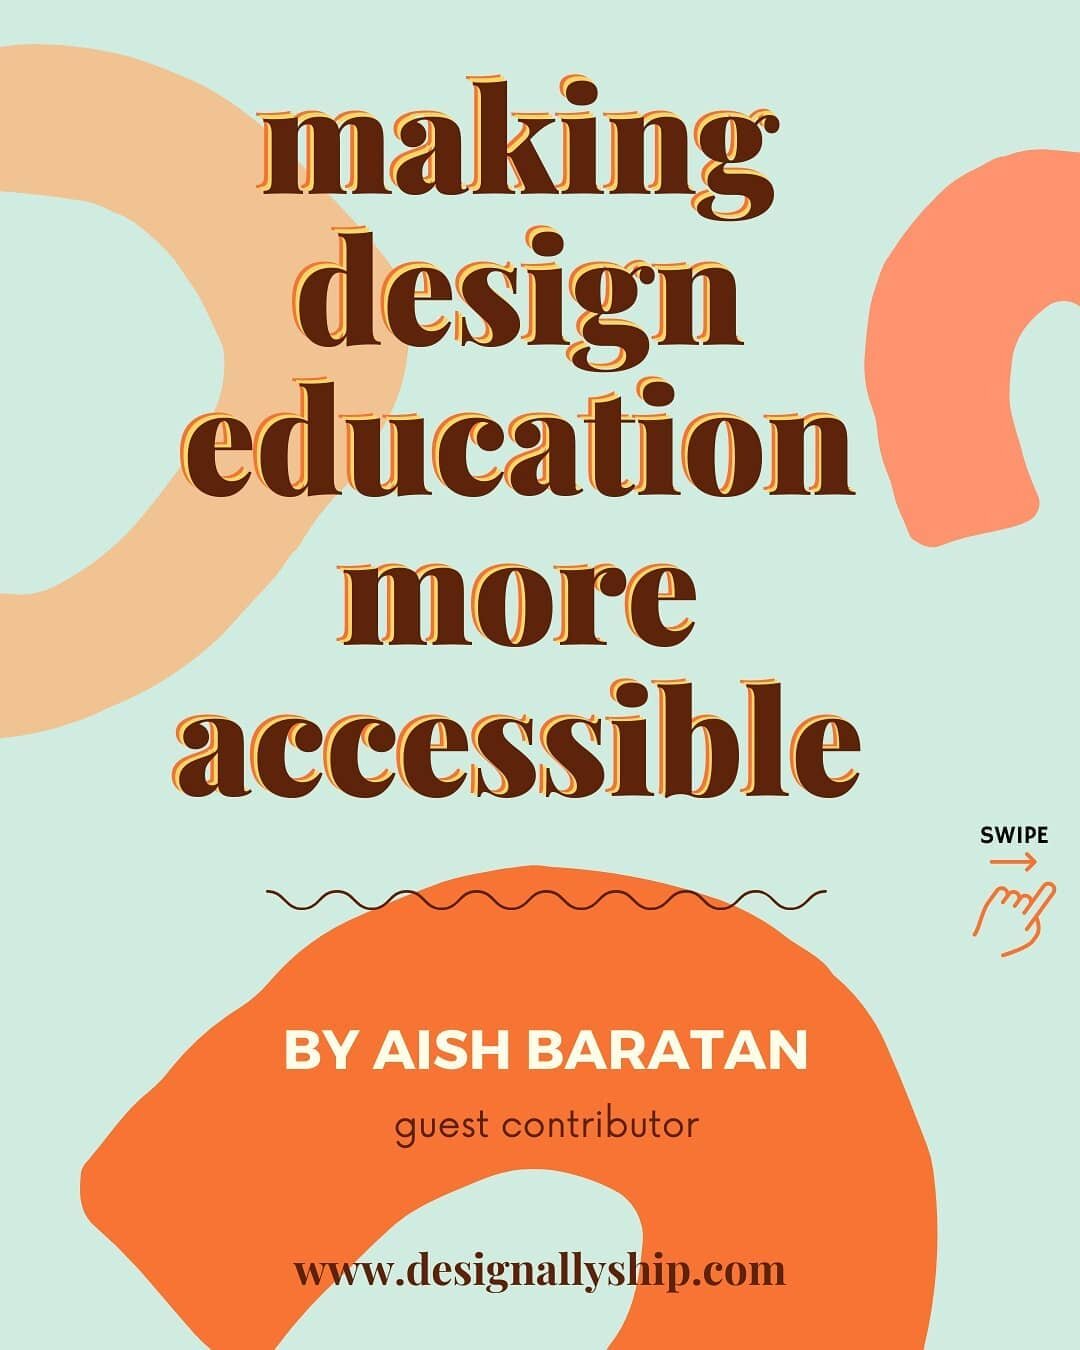 We worked with Design Ally Aish Baratan @aish_art_desn this week to share some tips on making design education more accessible.  Together, we can push for design education that is in-reach for everyone, starting from our own communities. Do you have 